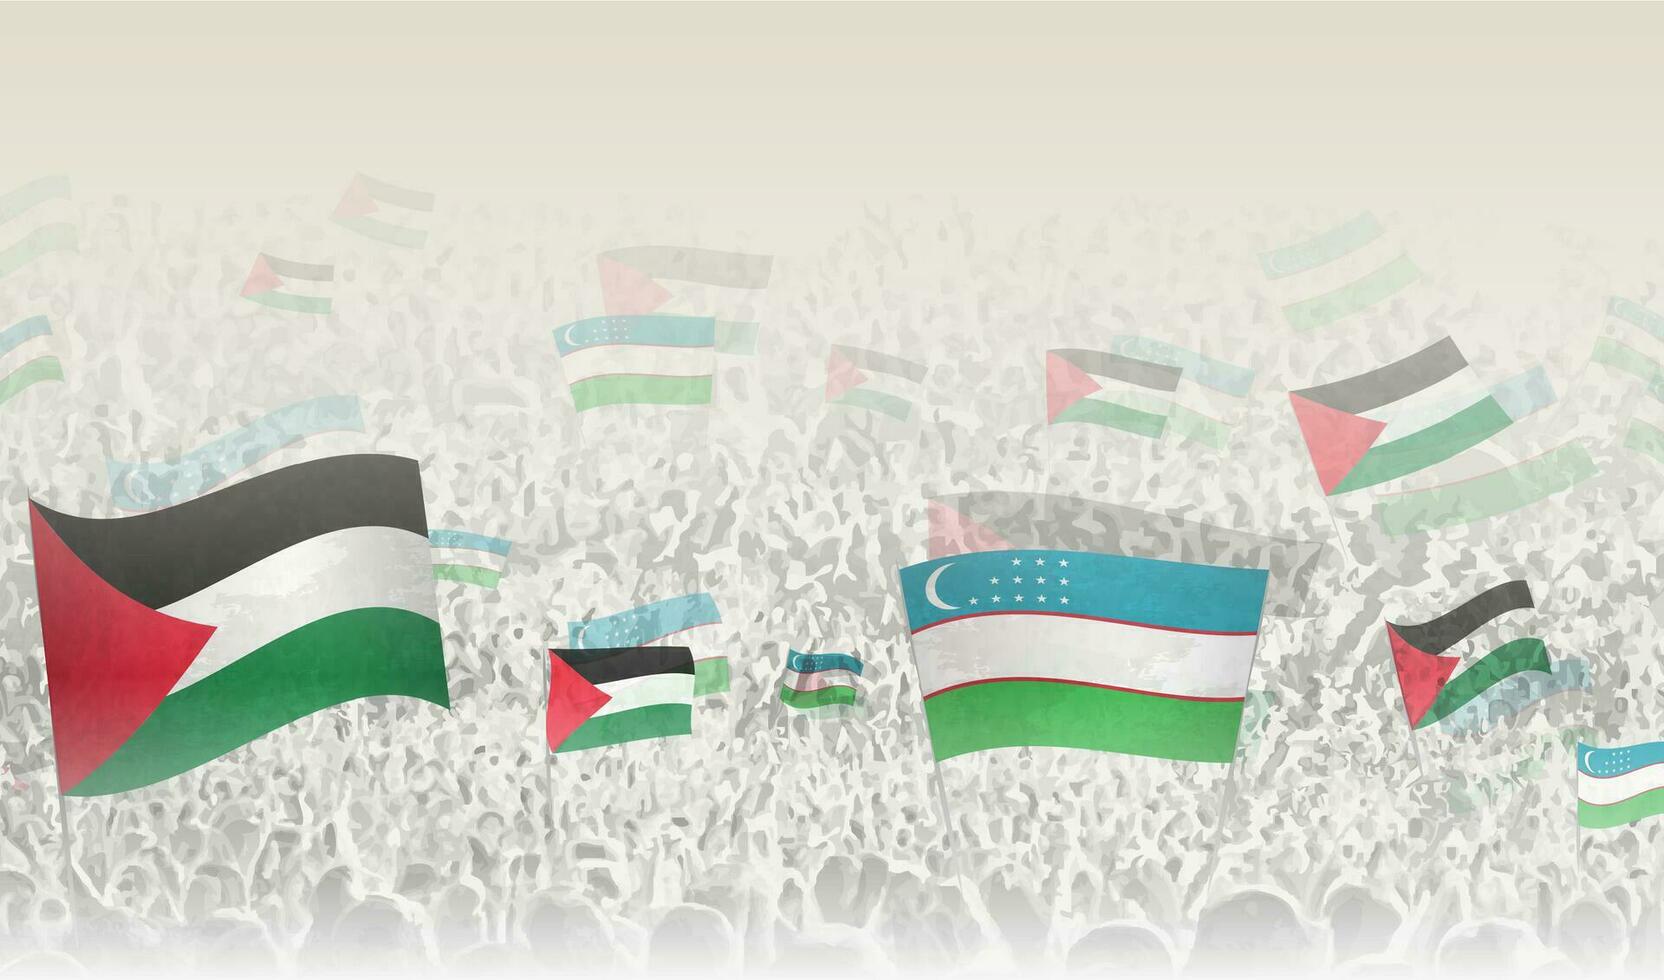 Palestine and Uzbekistan flags in a crowd of cheering people. vector